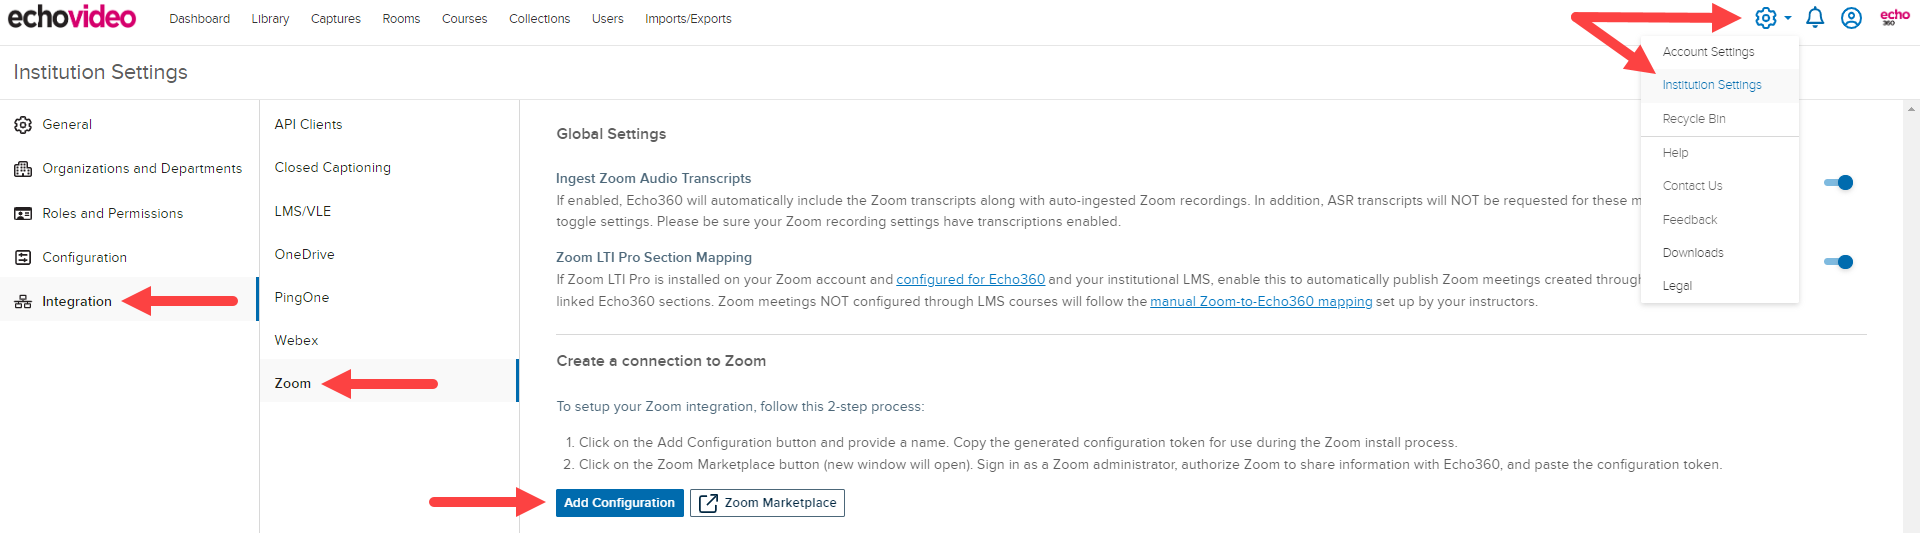 EchoVideo Integration page with navigation and Zoom configuration option identified as described